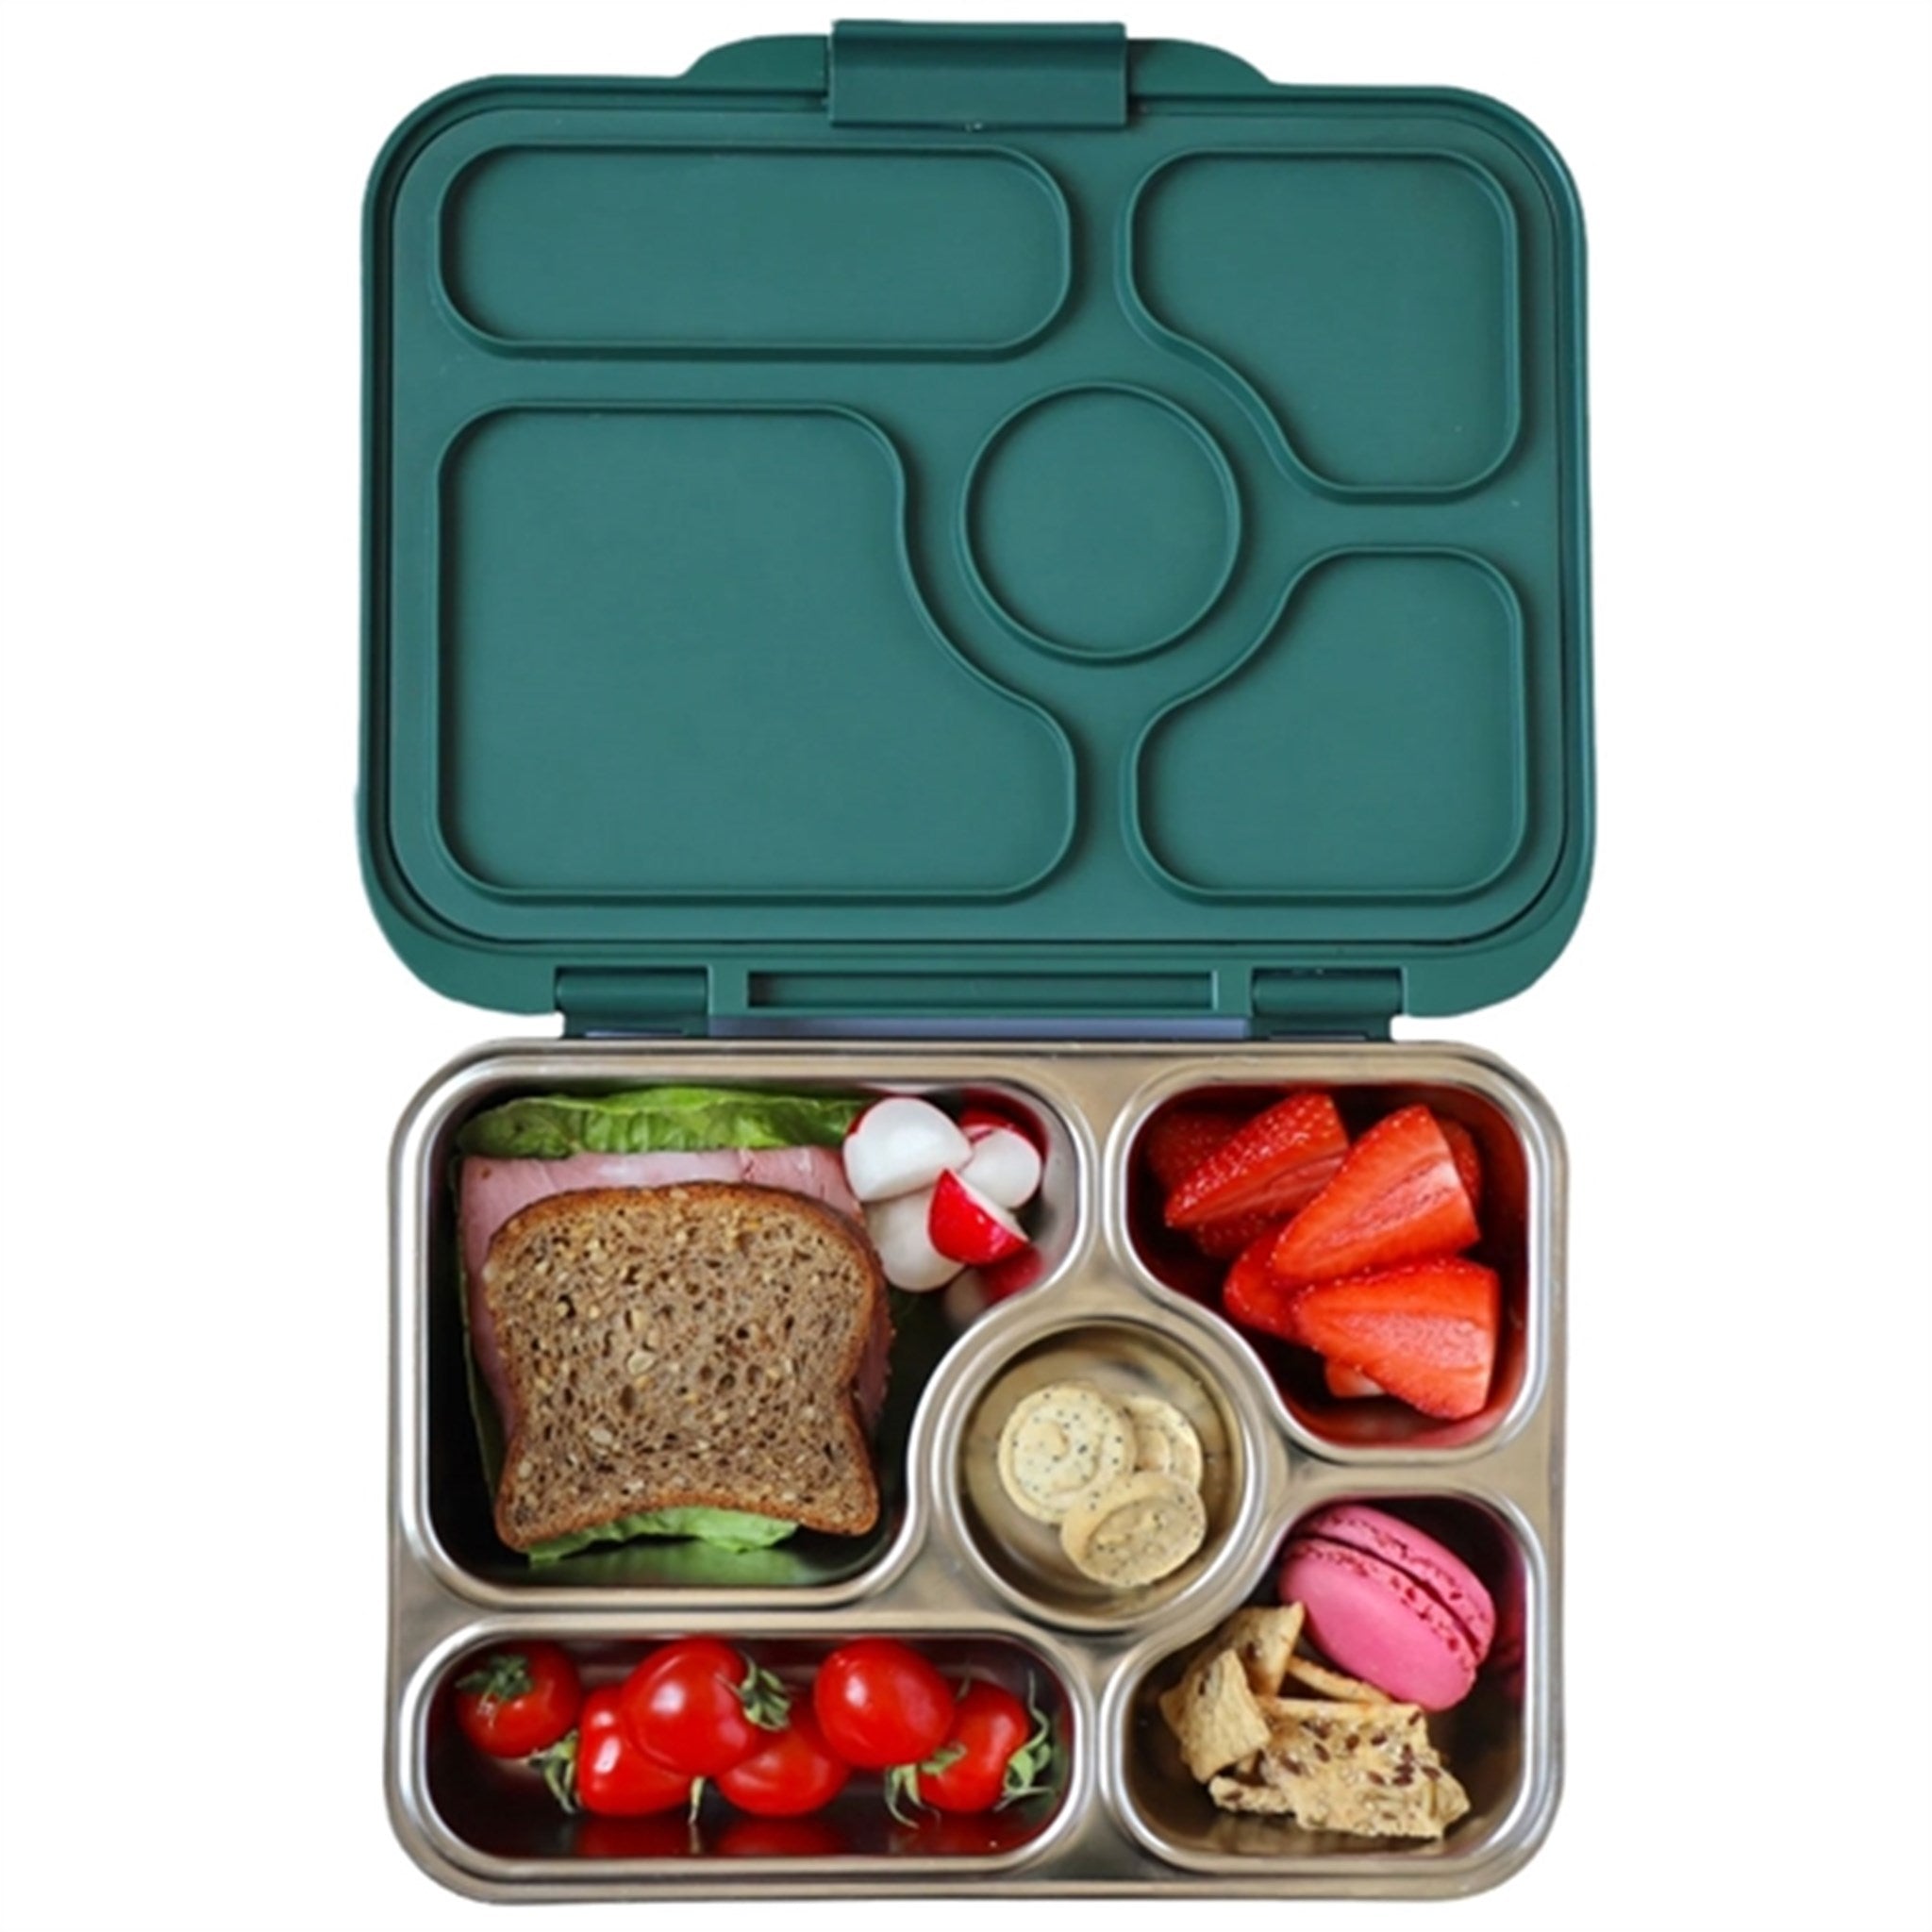 Yumbox Presto Stainless Steel Lunch Box Kale Green 4